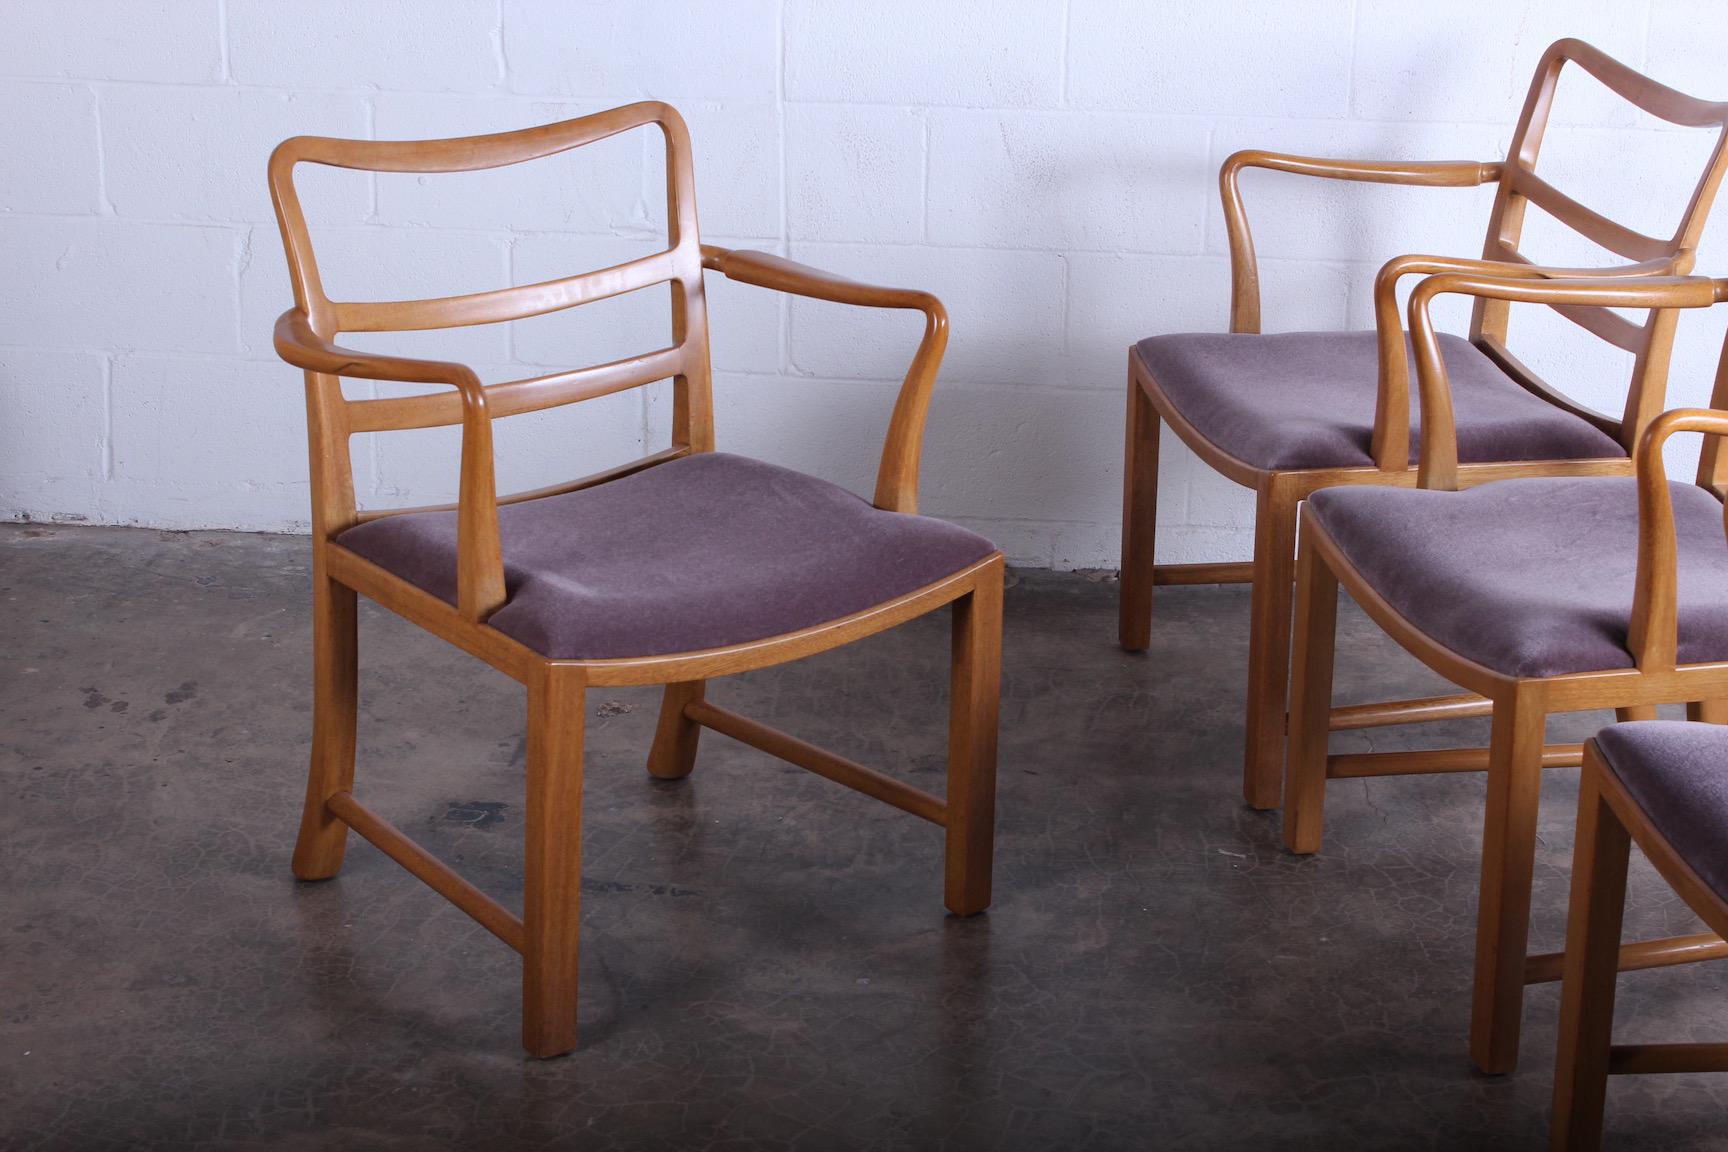 A set of four Dunbar armchairs in bleached mahogany with mohair upholstery. Designed by Edward Wormley.